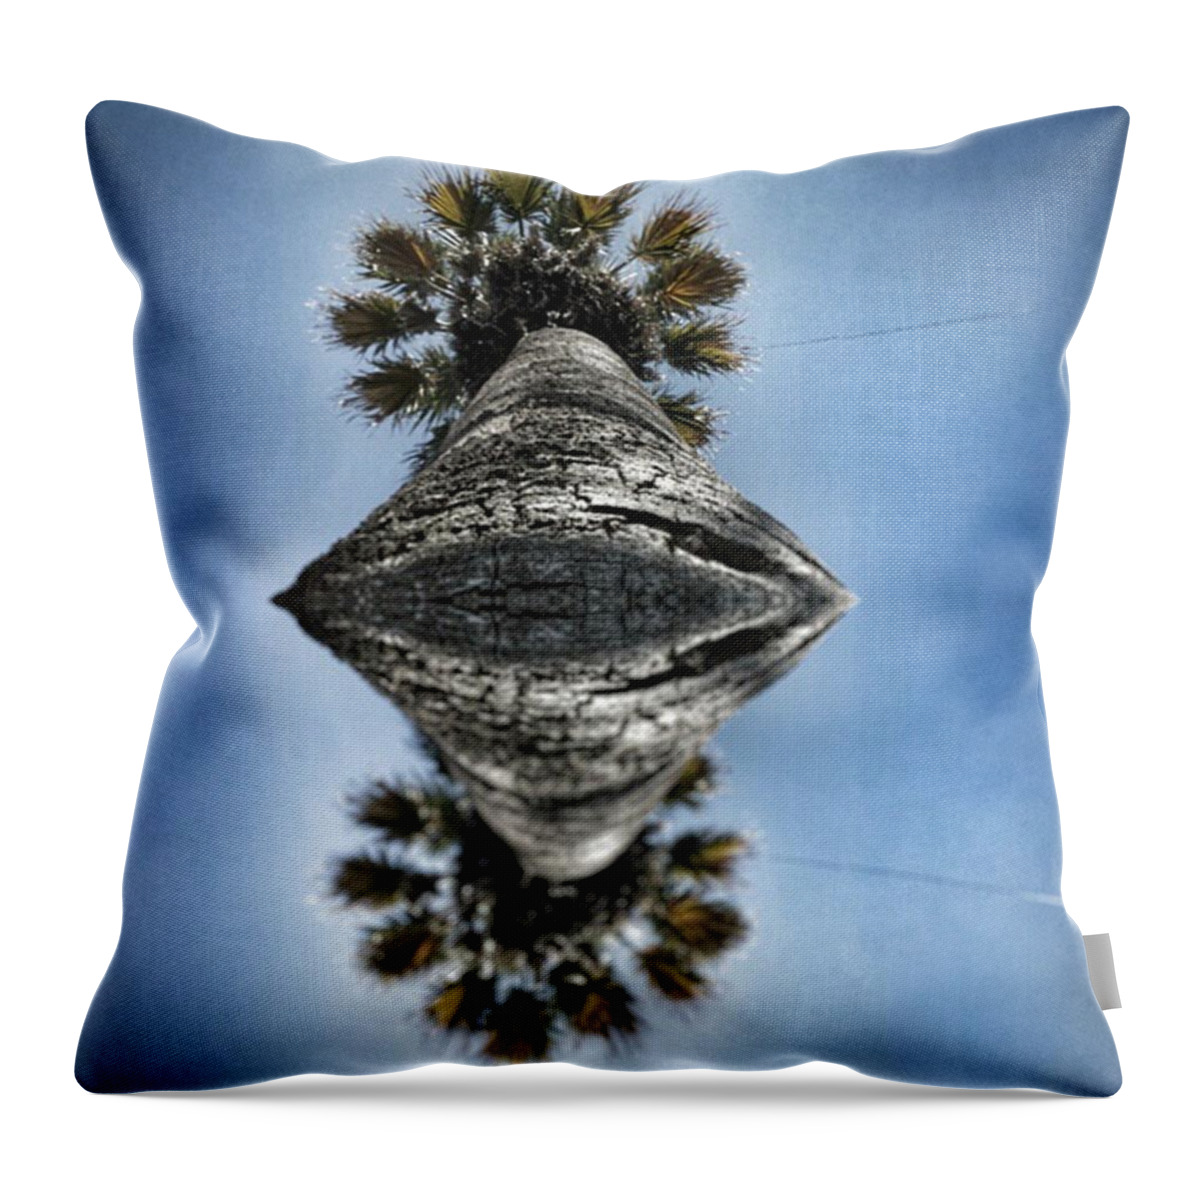 Sunnyday Throw Pillow featuring the photograph Just One Perspective by Jorge Ferreira